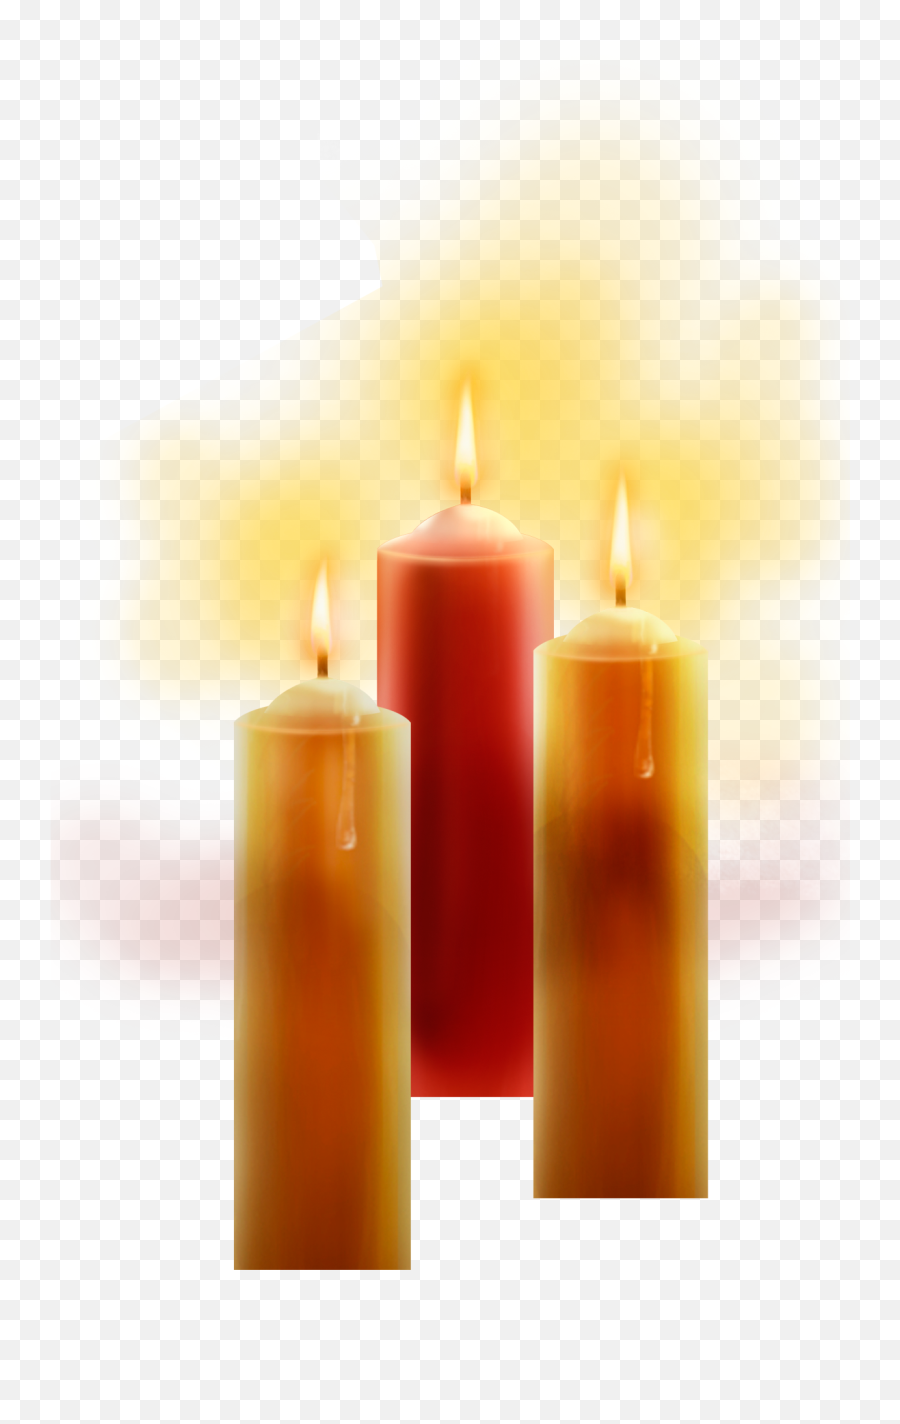 Candle Computer Icons Clip Art - Candles Png Download 1273 Candle Hd Images Png Emoji,Emoji Candles